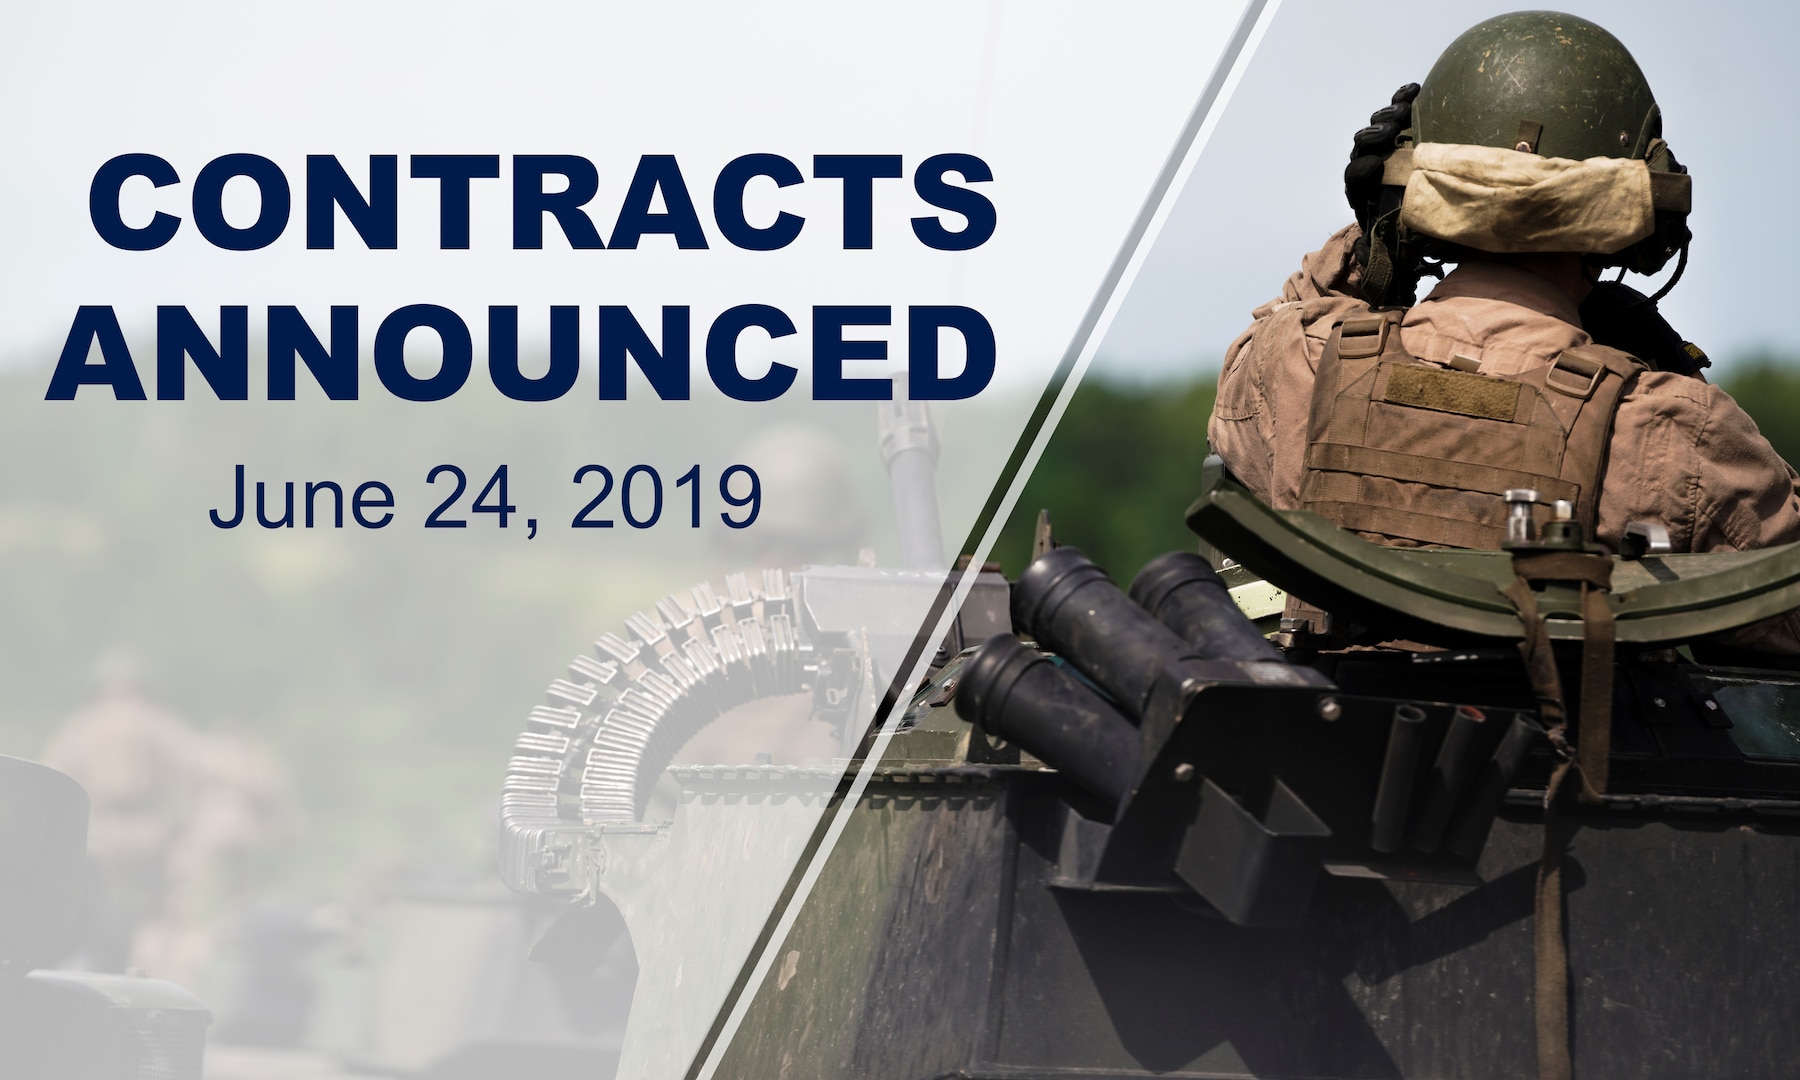 Service member sits on military vehicle, with back towards camera. Text says: "Contracts announced. June 24, 2019"